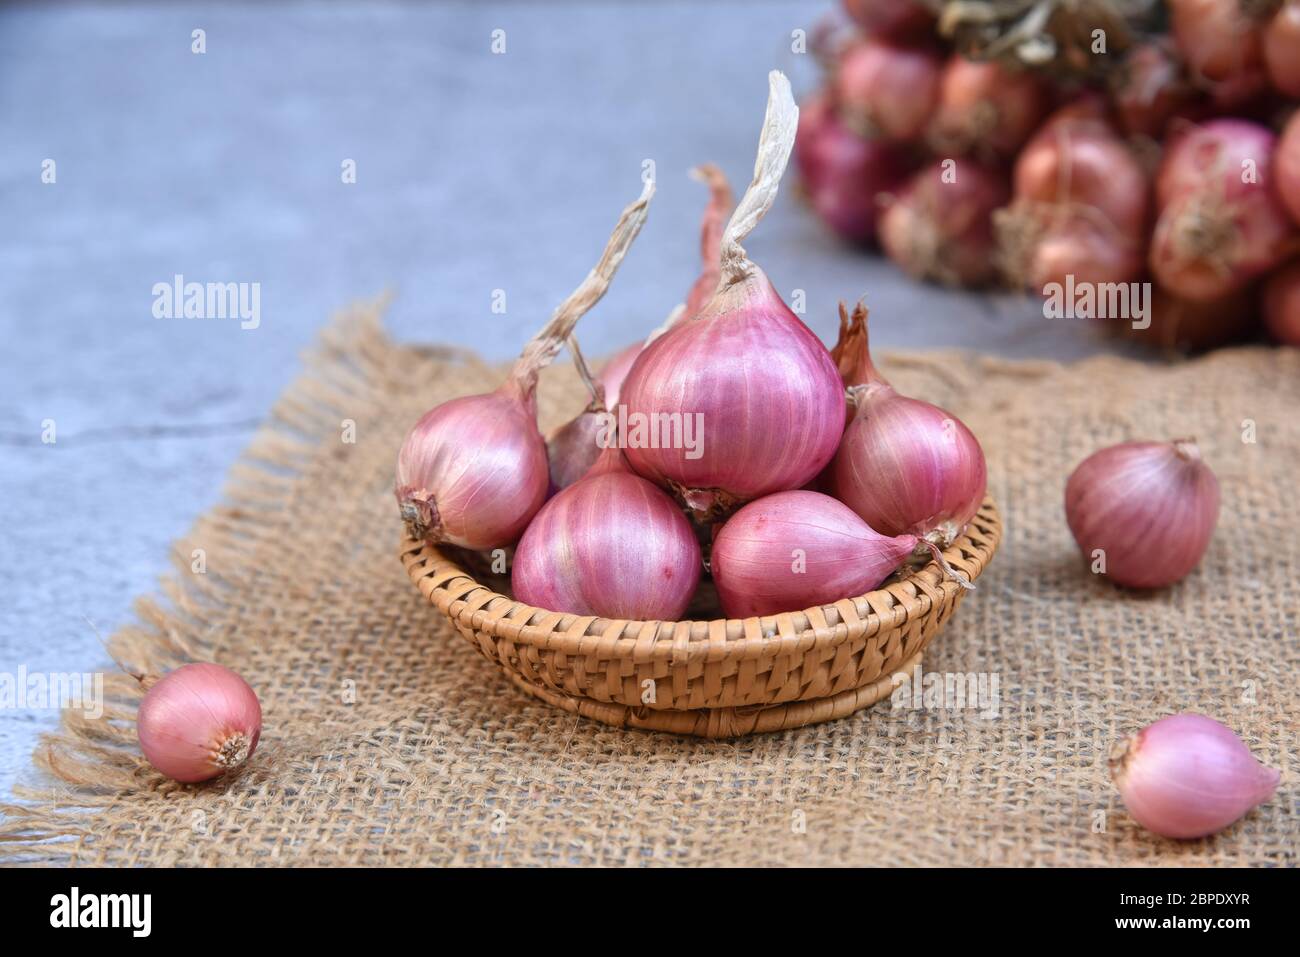 Premium Photo  Thai spicy herb shallot bunch of shallots with root on  wooden table and space on right